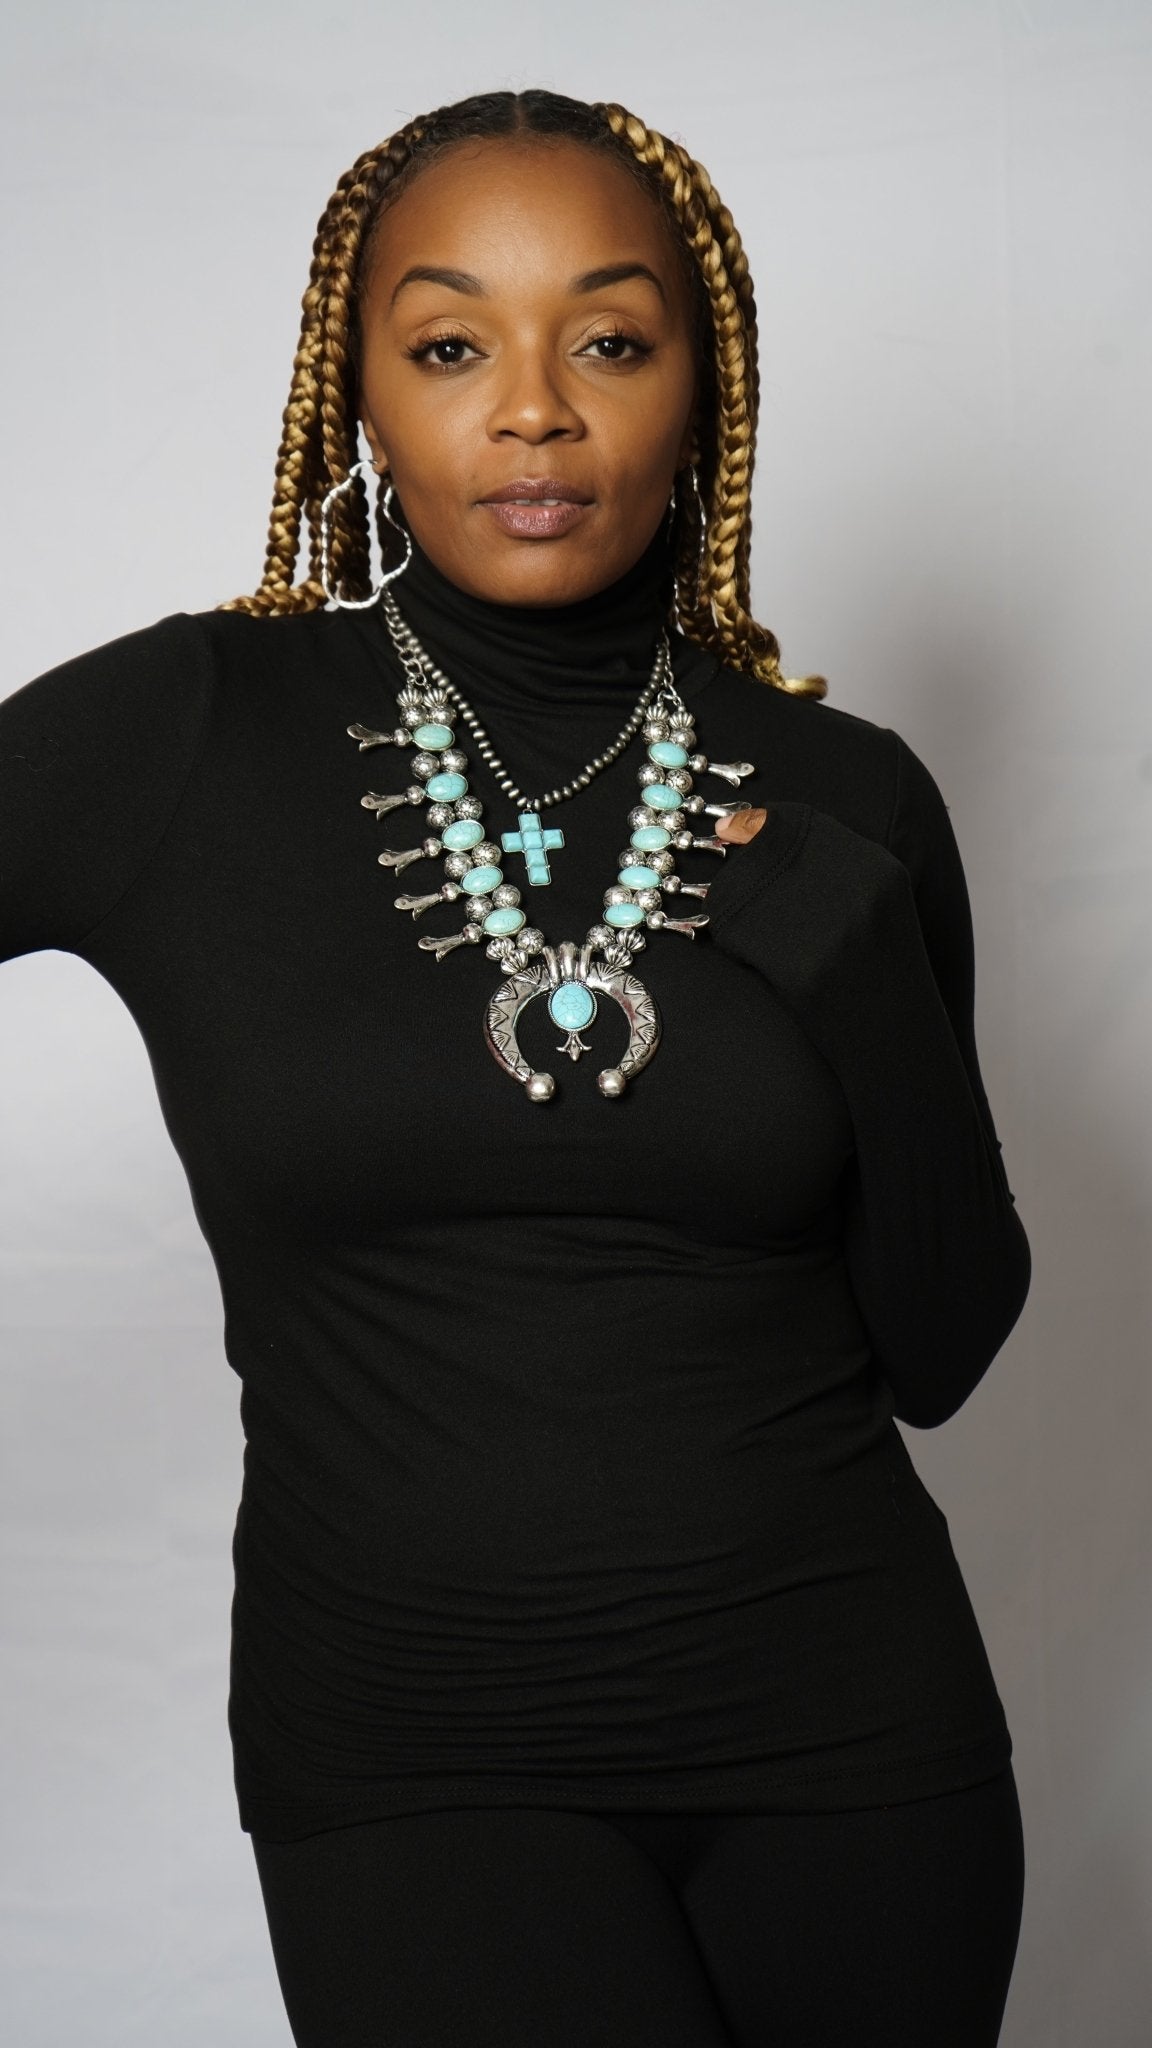 The Bohemian Statement Pieces Of Jewelry - House of FaSHUN by Shun Melson